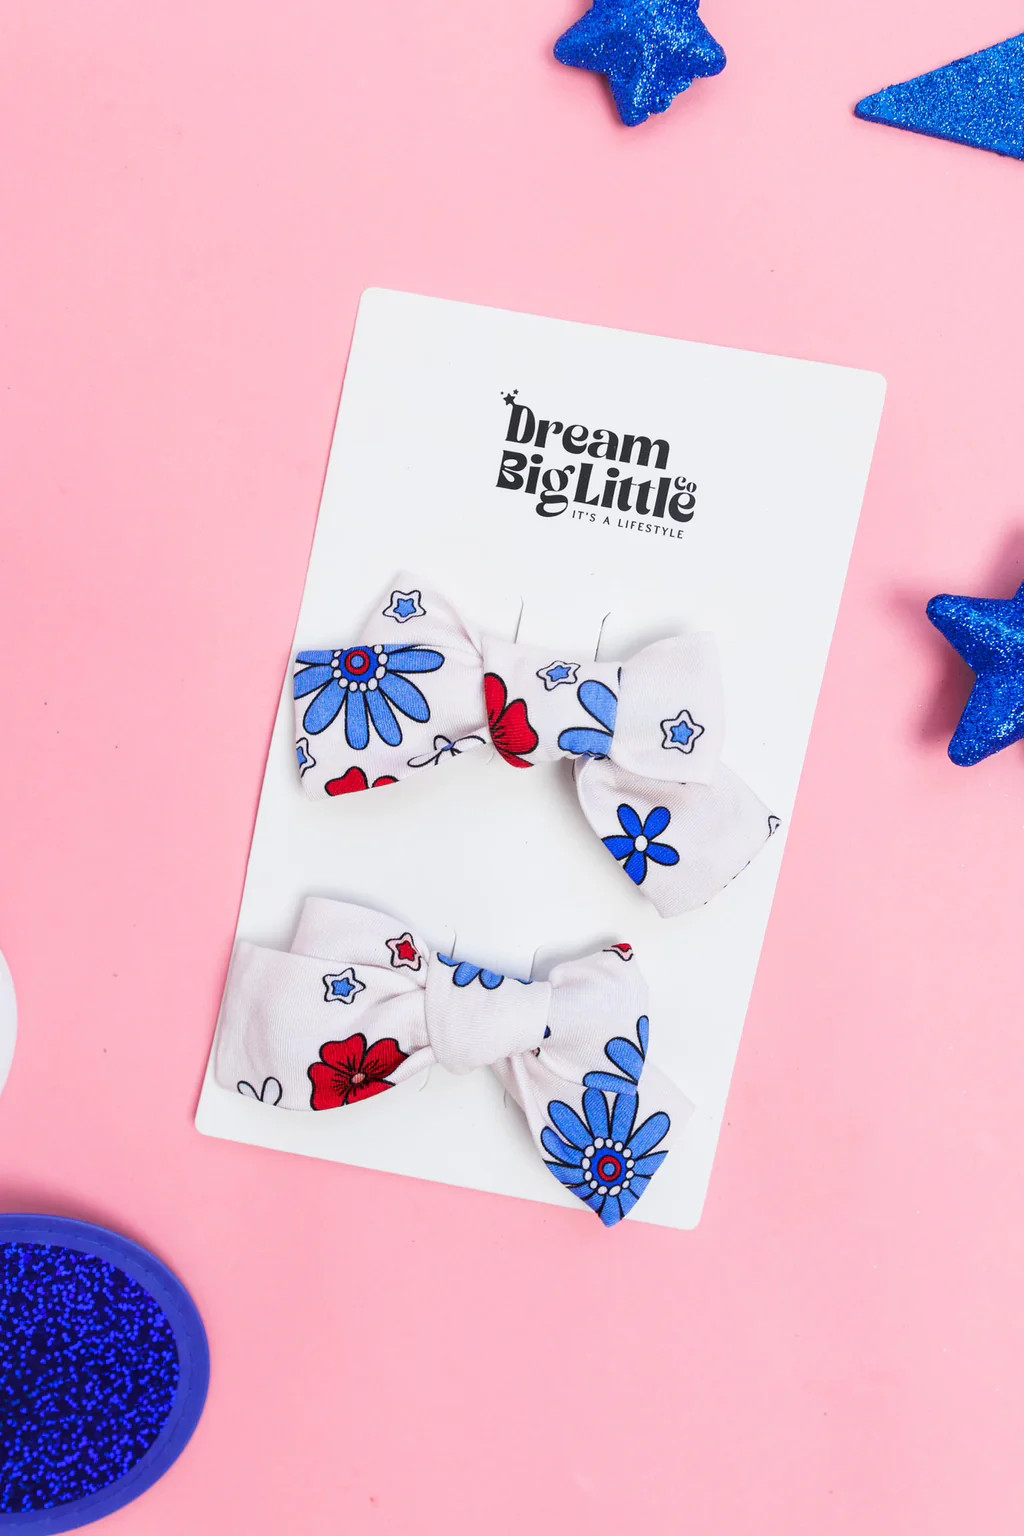 EXCLUSIVE FREEDOM BLOOMS DREAM BOW HAIR CLIPS | DREAM BIG LITTLE CO